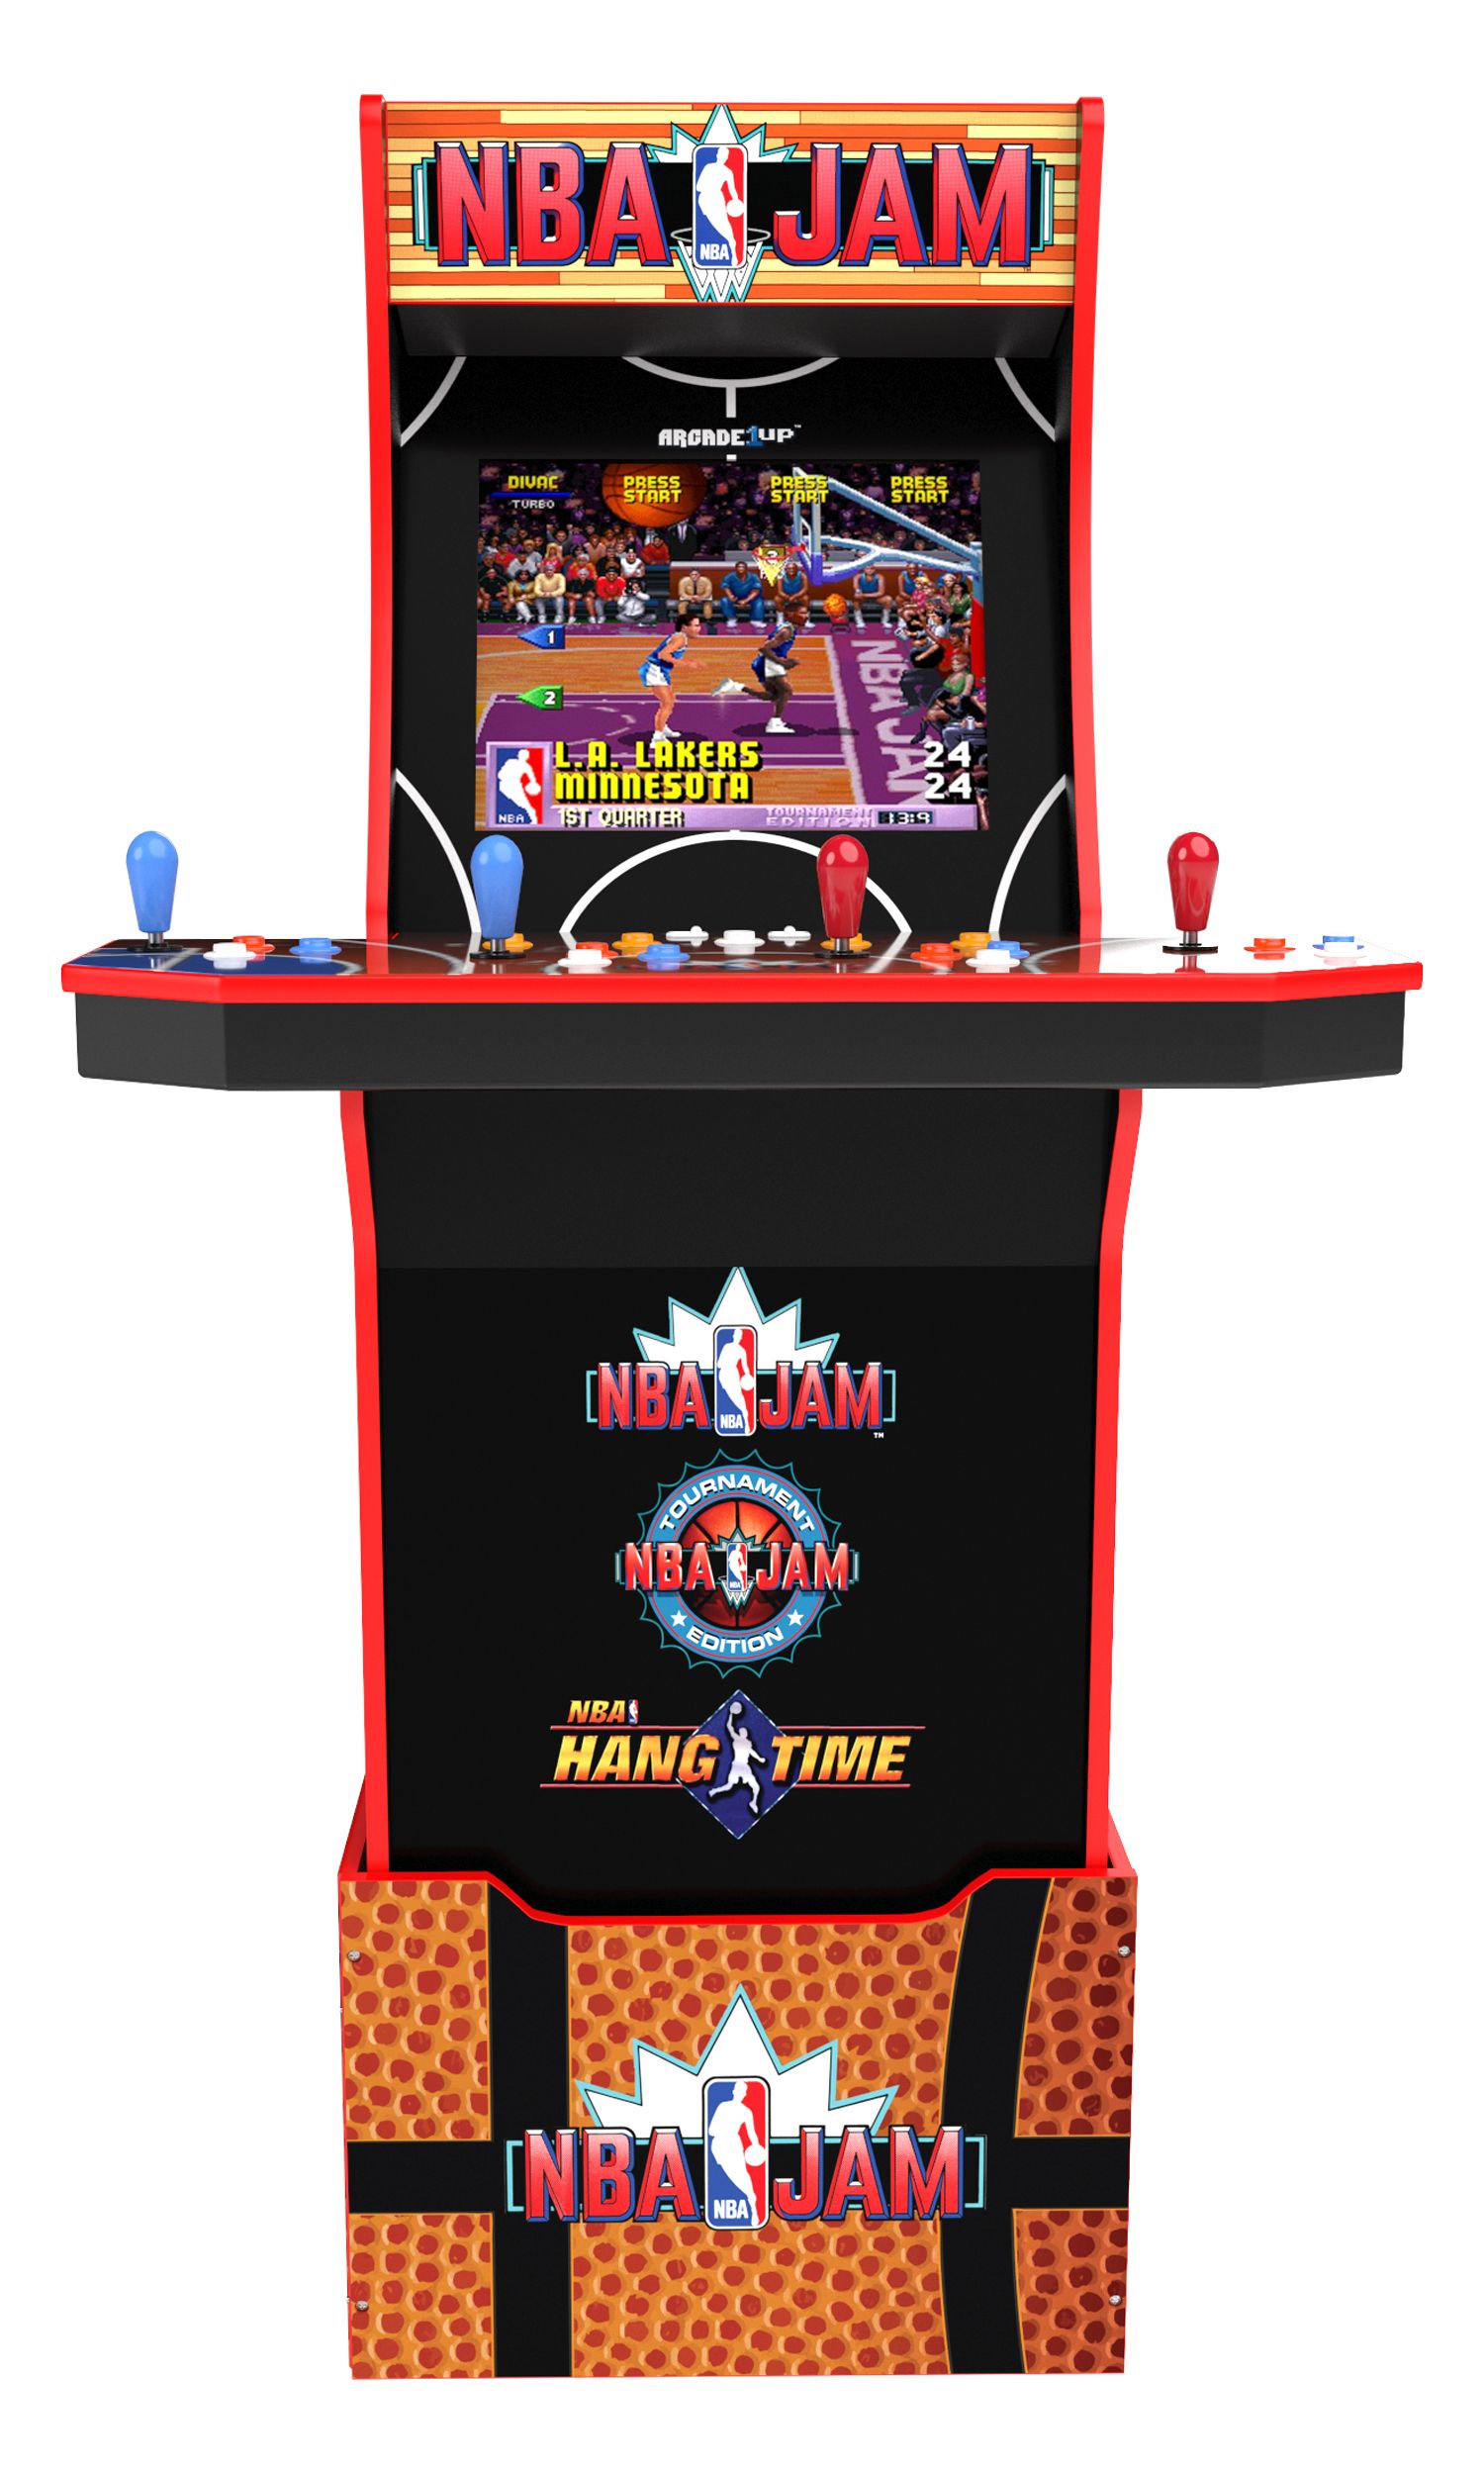 Arcade 1UP, NBA Jam Arcade w/ riser and light up marquee - image 2 of 12